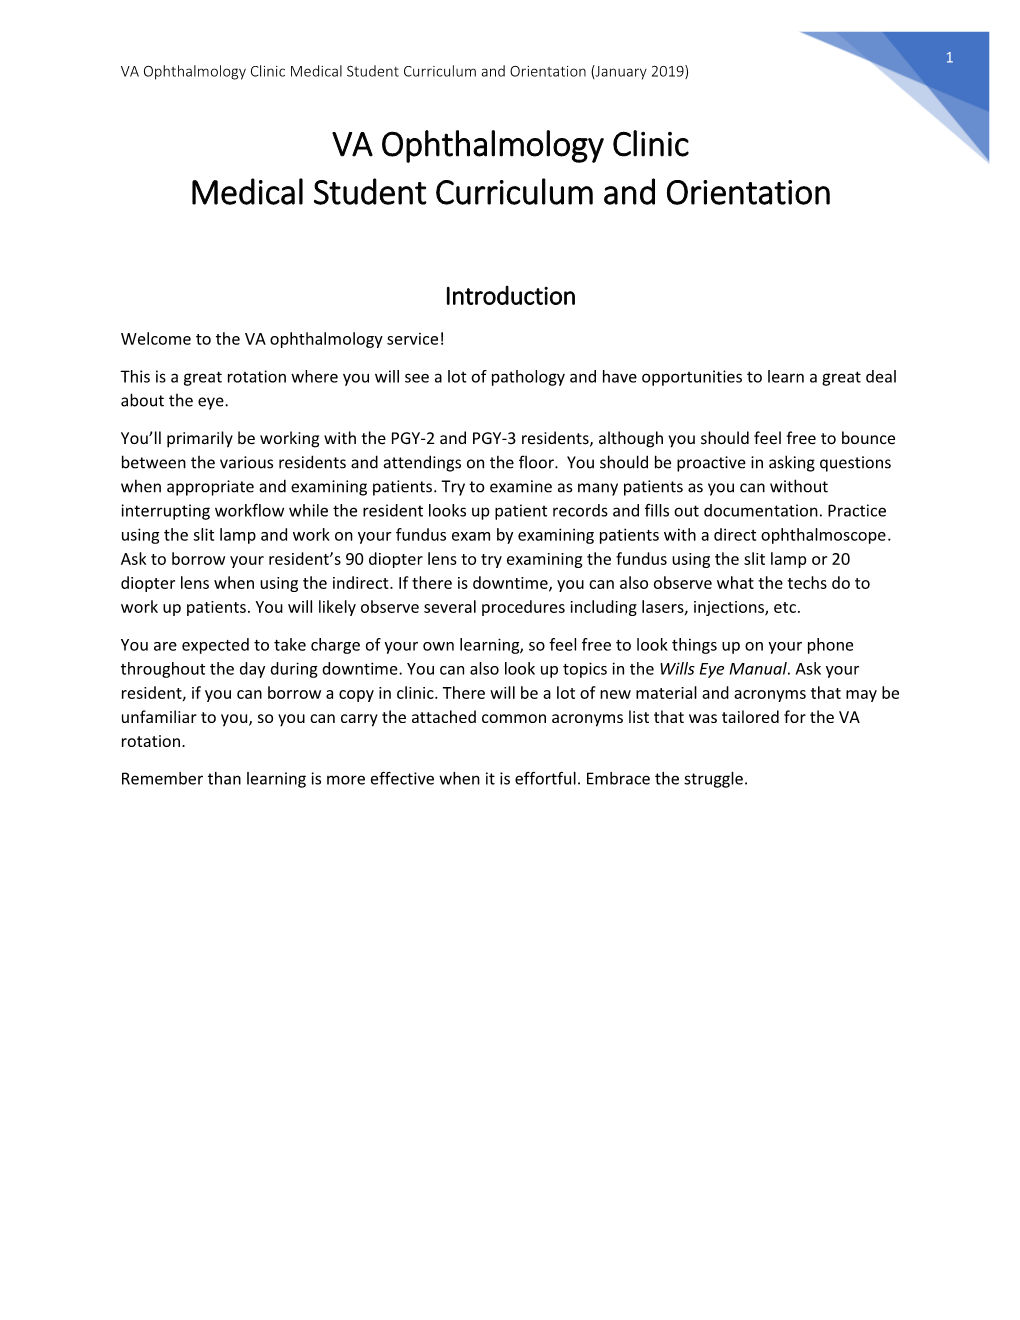 VA Ophthalmology Clinic Medical Student Curriculum and Orientation (January 2019)